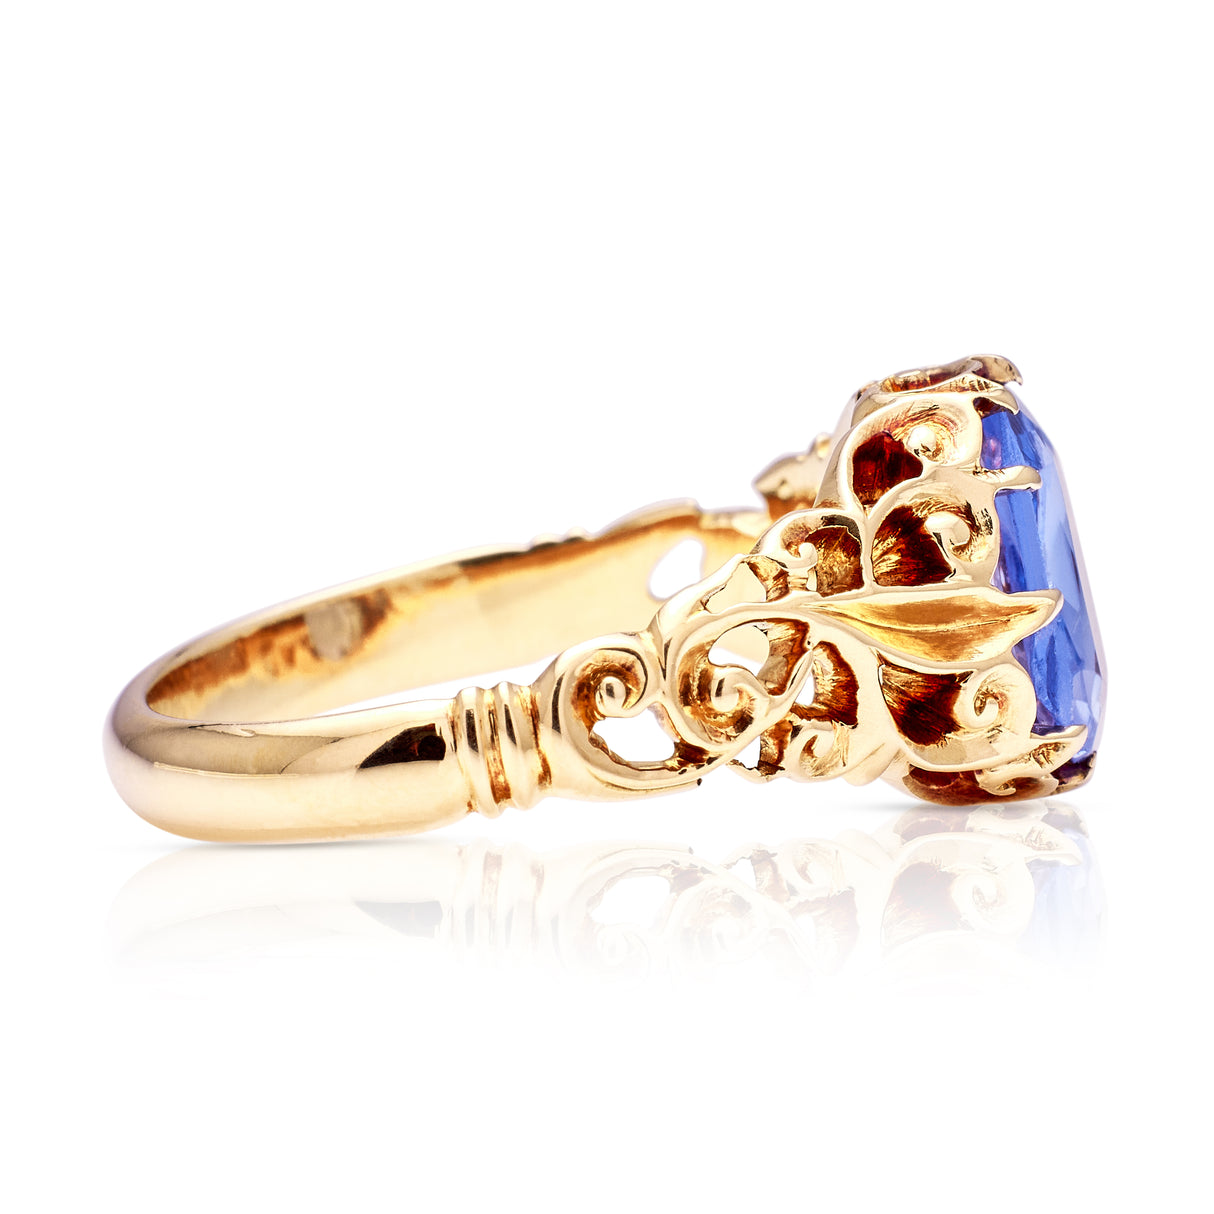 Antique, Victorian Ceylon Sapphire Ring, 18ct Yellow Gold side view